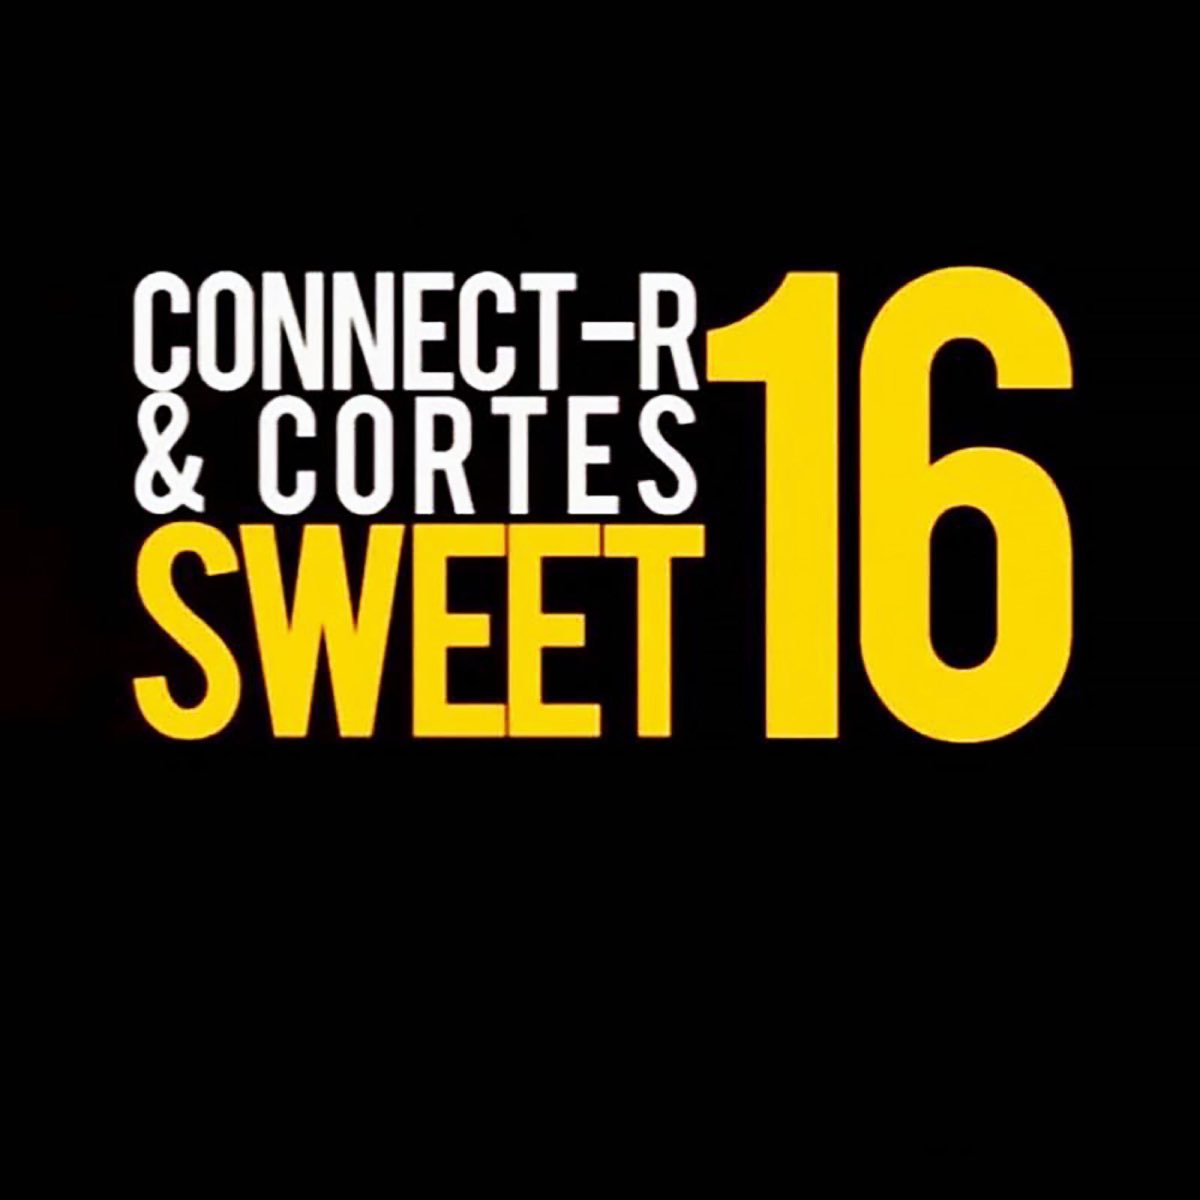 Sweet 16 (feat. Connect-R) - Single by Cortes on Apple Music